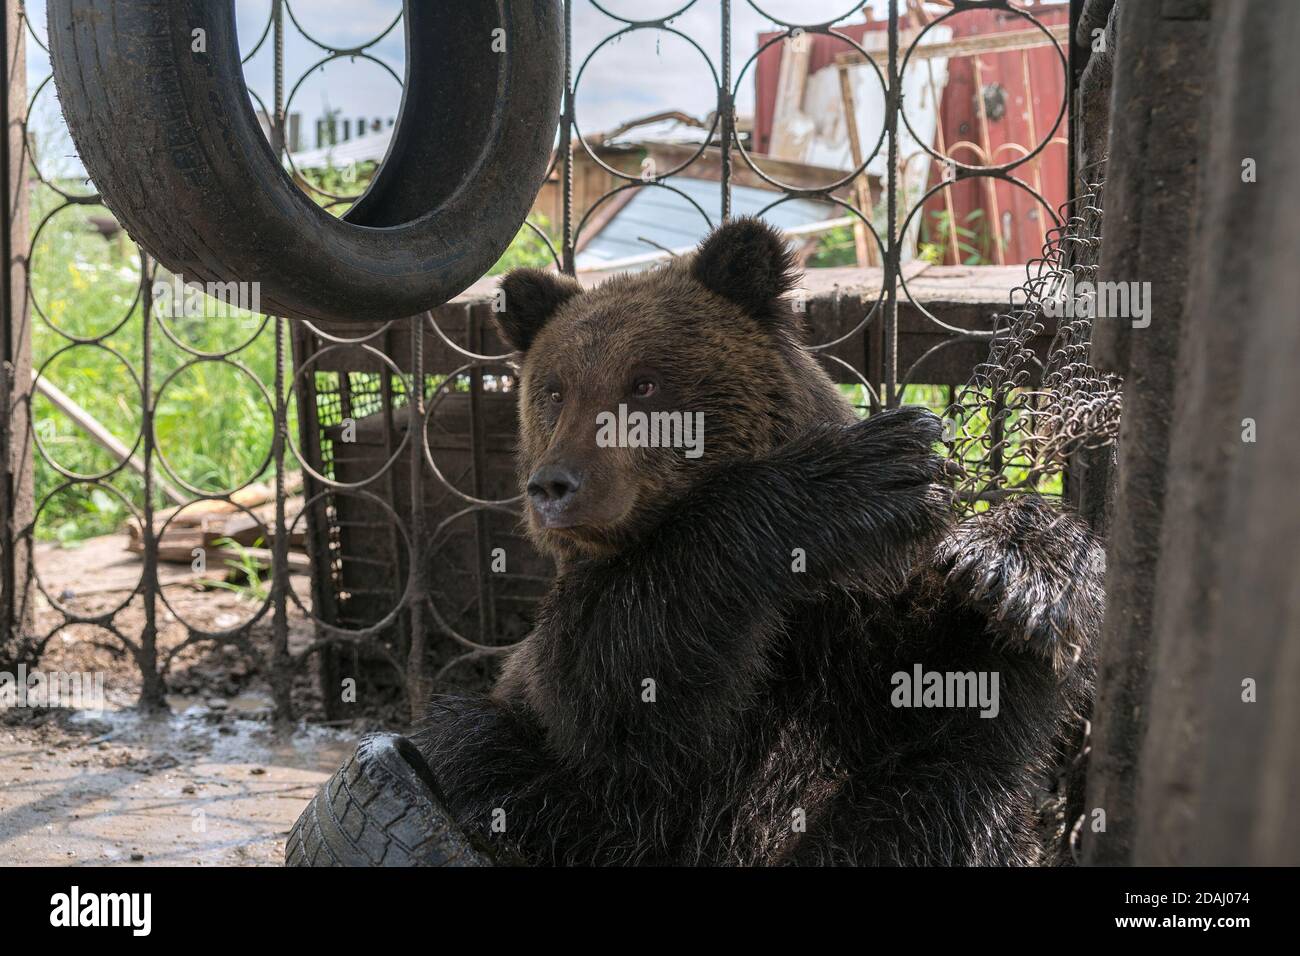 A brown bear cub (Ursus arctos) sits in a cage on automobile tires. Stock Photo